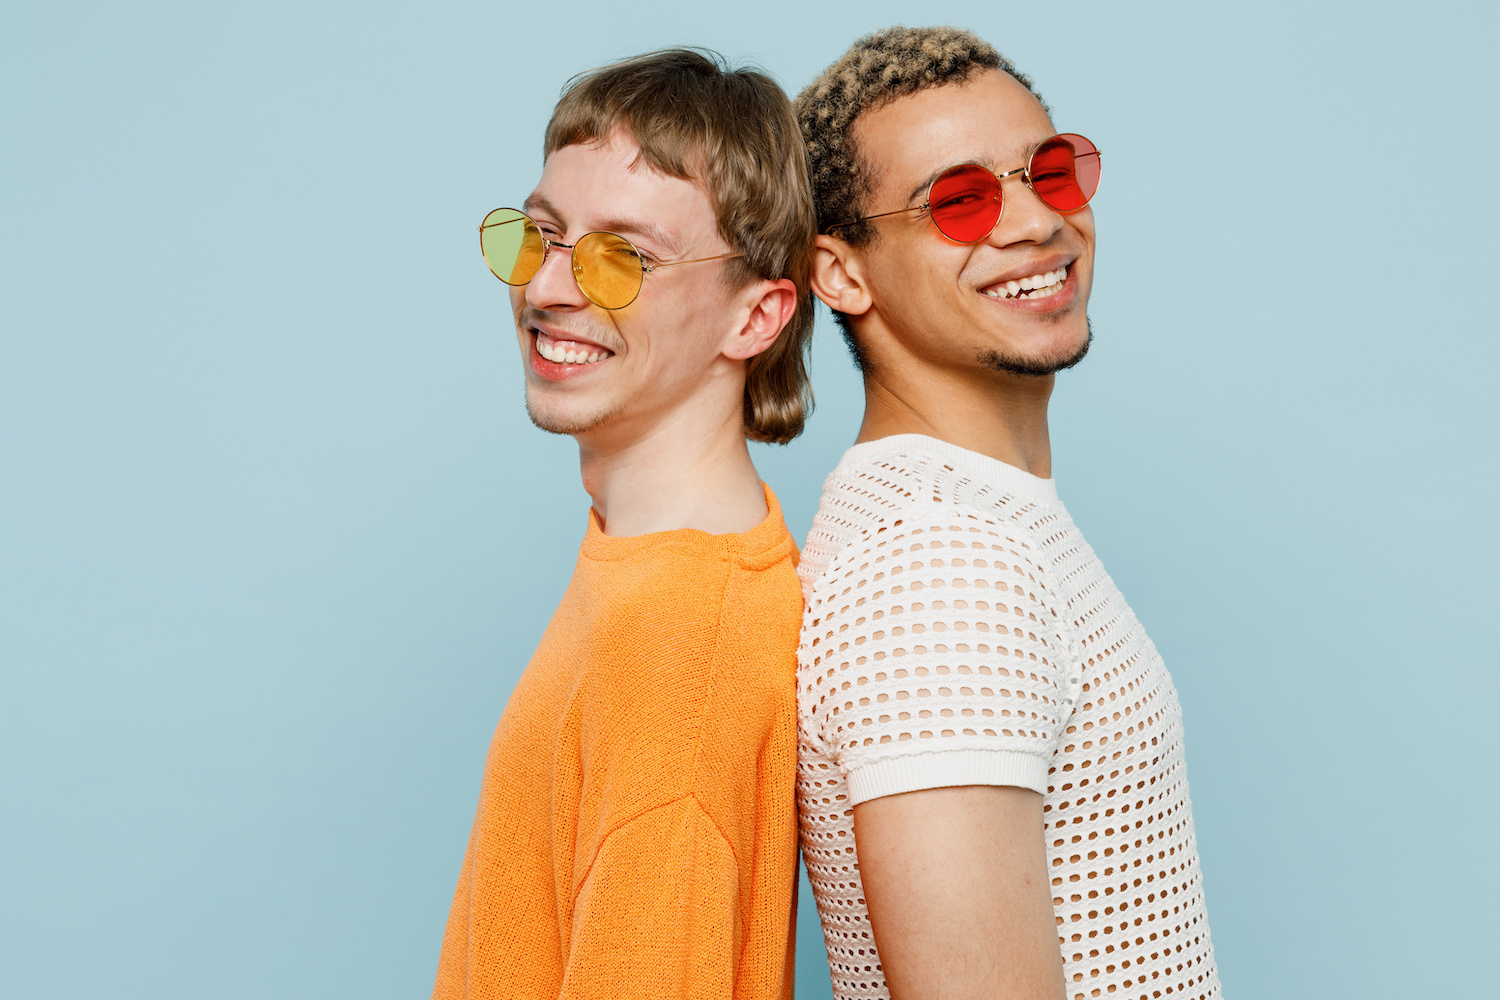 side view young happy couple two gay men wearing casual clothes sunglasses together stand back to back isolated on plain blue color background studio portrait. pride day june month love lgbtq concept.